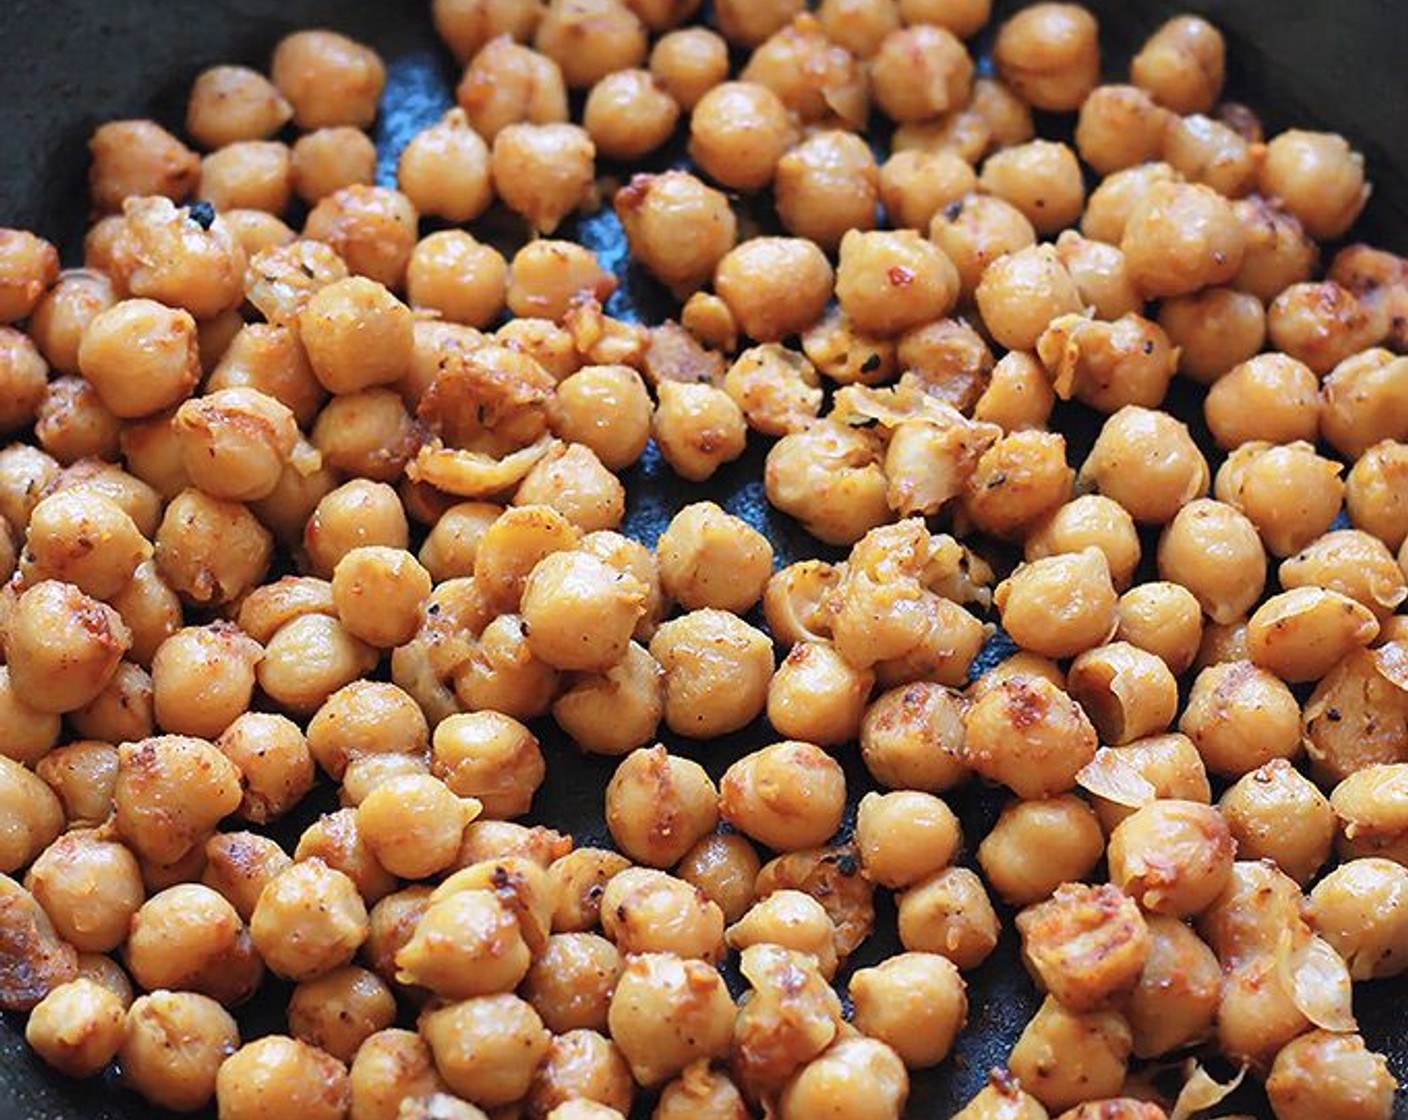 step 4 After sauteing the tofu, add a bit more oil to the pan. Add McCormick® Taco Seasoning Mix (1 packet) to the pan and sprinkle on Chickpeas (2 cans). Saute the chickpeas until well coated and heated.